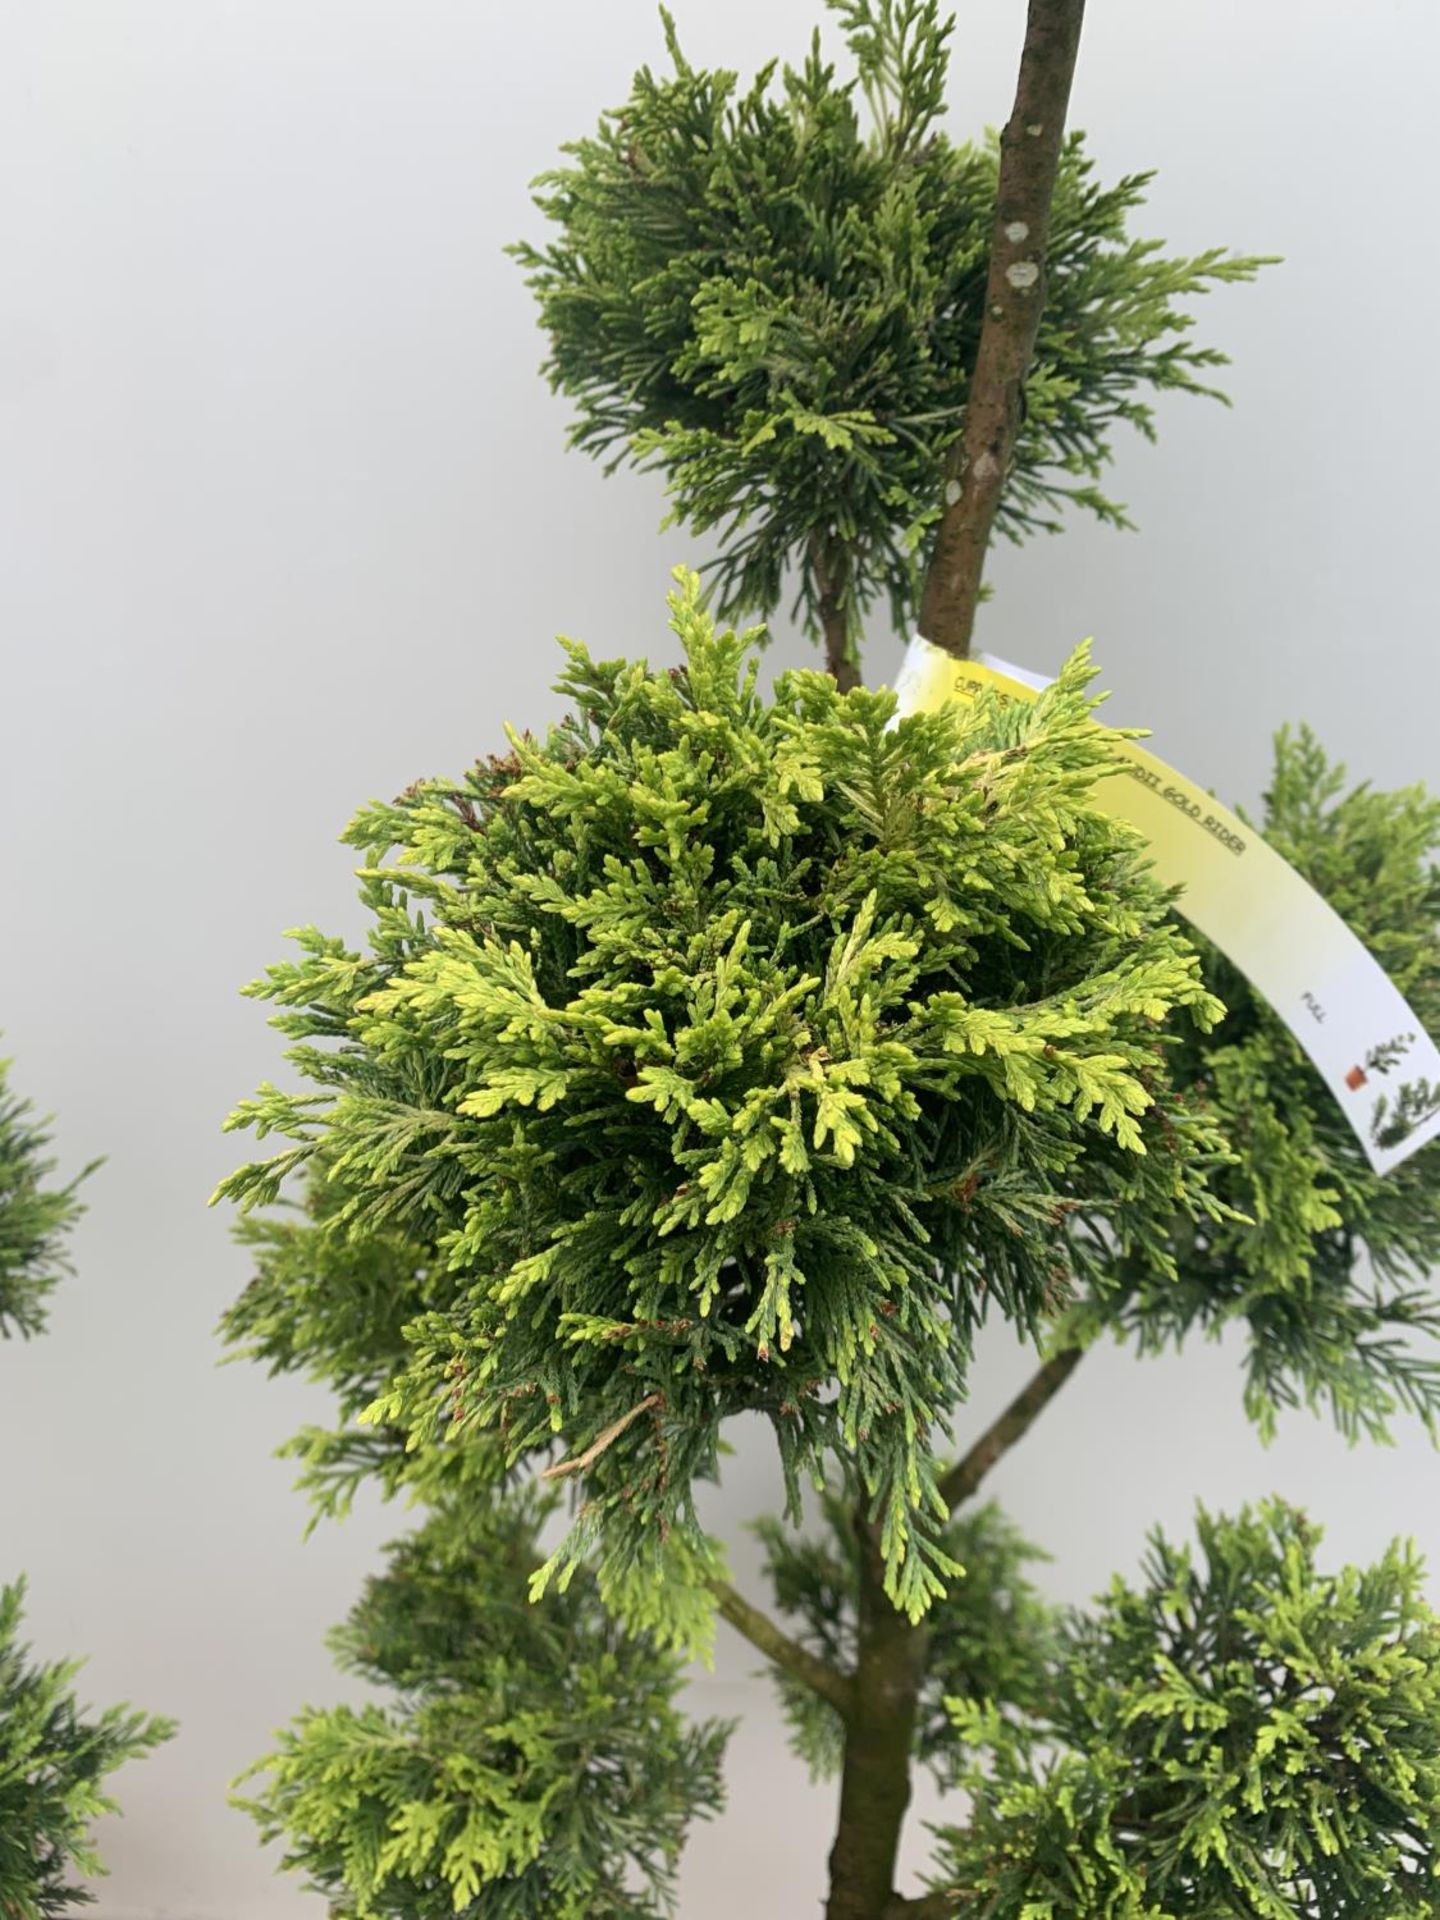 TWO POM POM TREES CUPRESSOCYPARIS LEYLANDII 'GOLD RIDER' APPROX 160CM IN HEIGHT IN 15 LTR POTS - Image 4 of 5